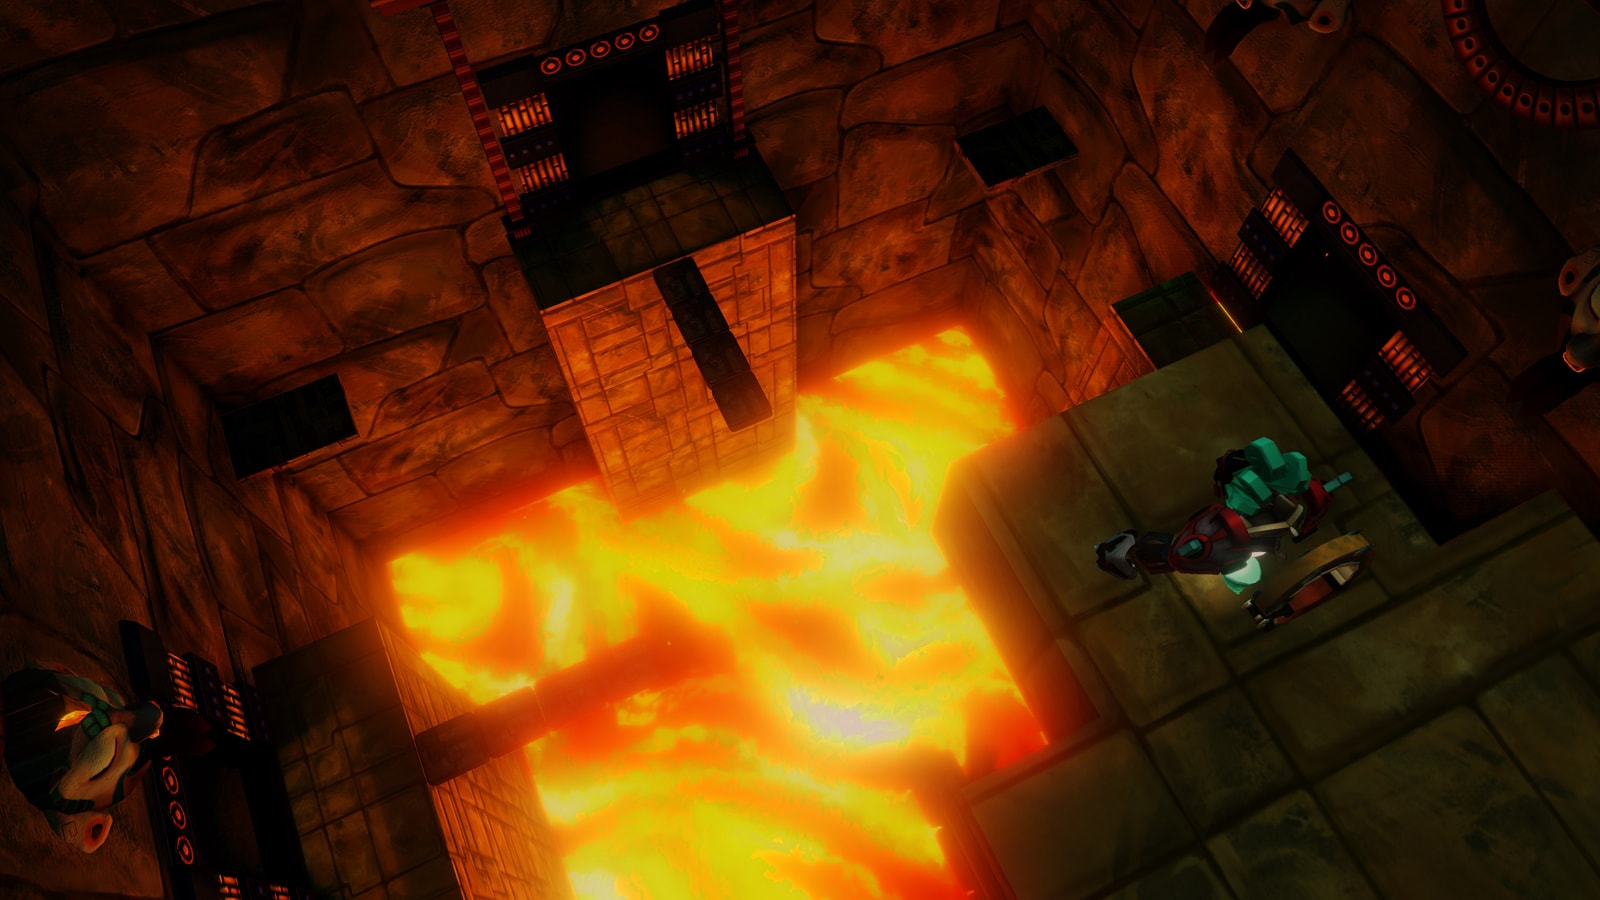 A glowing red lava pit at the bottom of a stone temple room